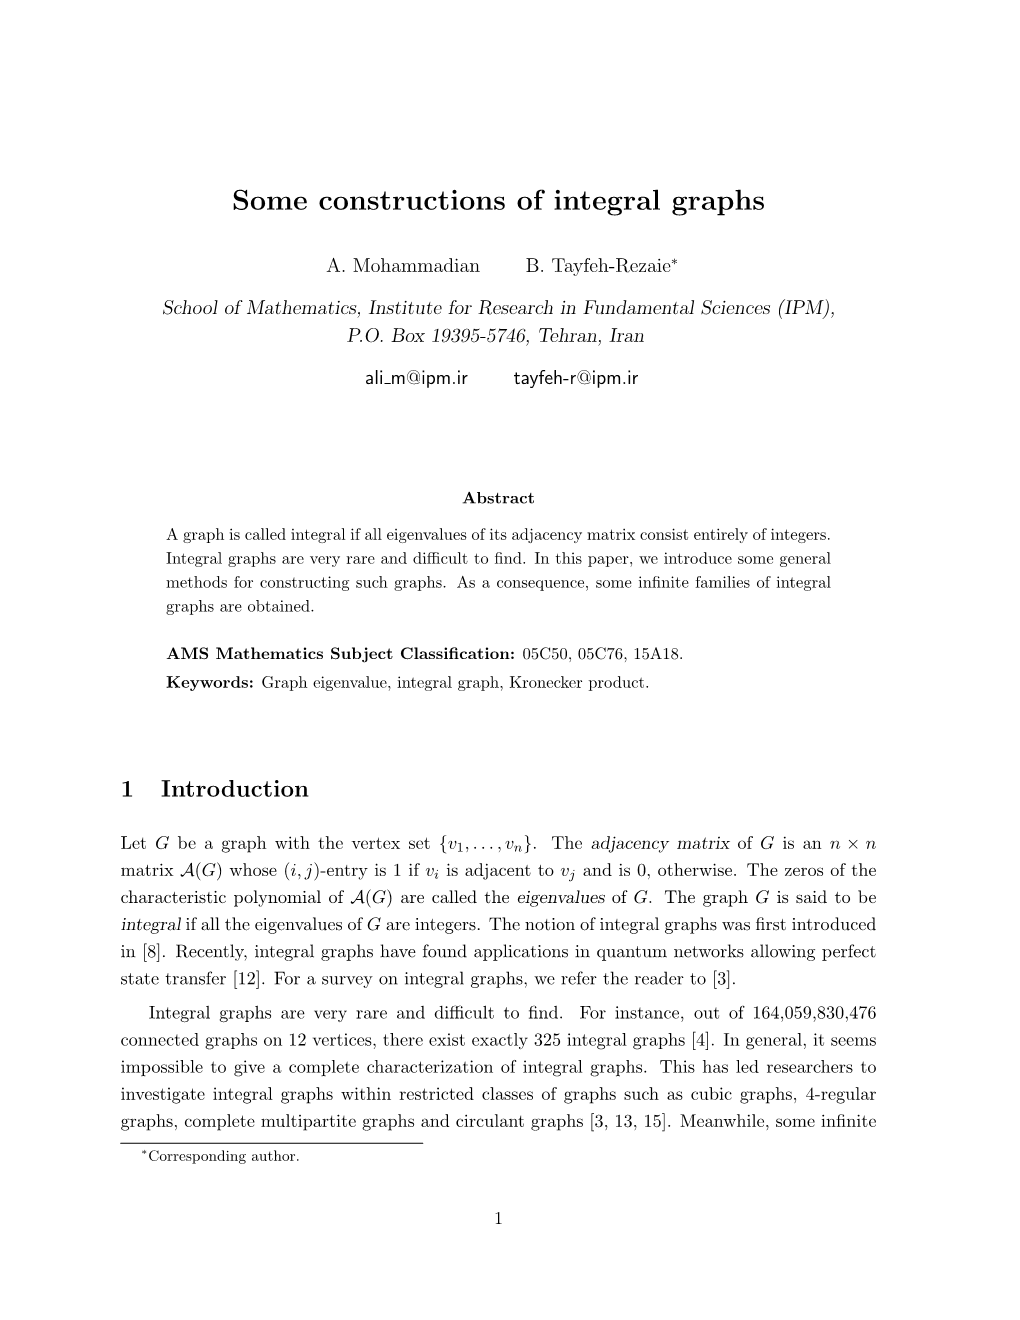 Some Constructions of Integral Graphs